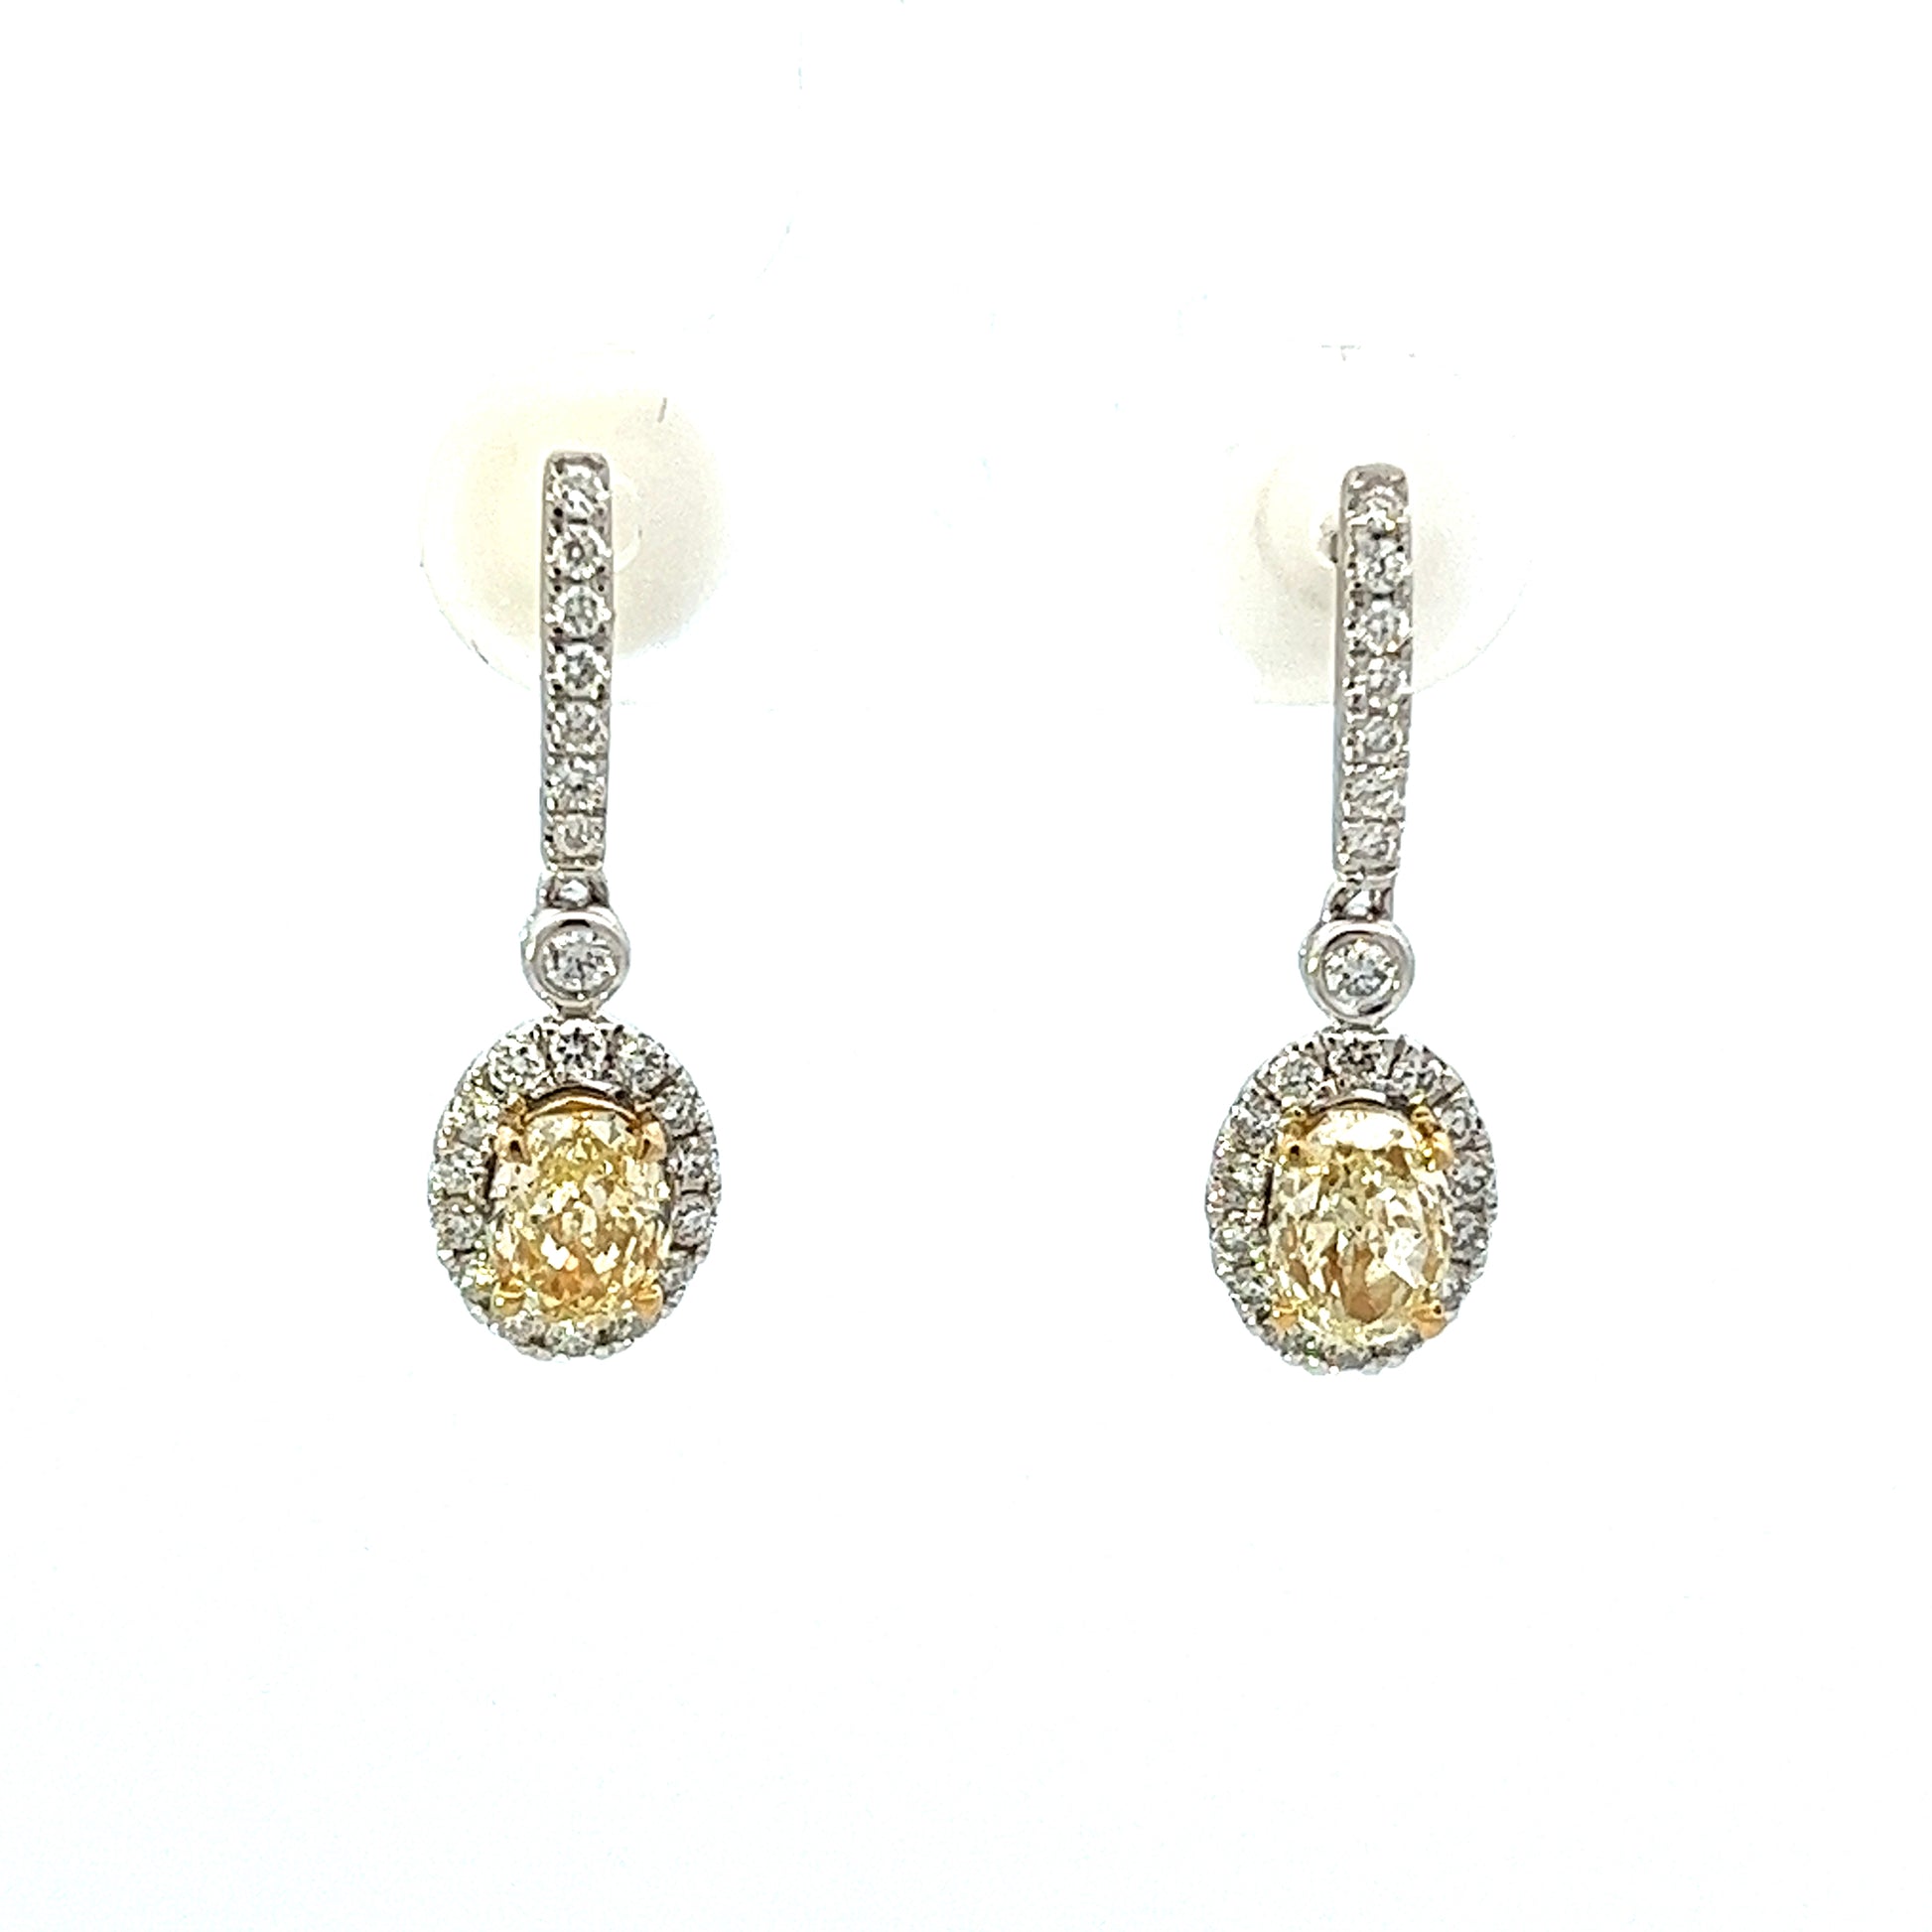 1.08ct total weight oval yellow diamonds and 0.33ct total weight round diamond dangle earrings